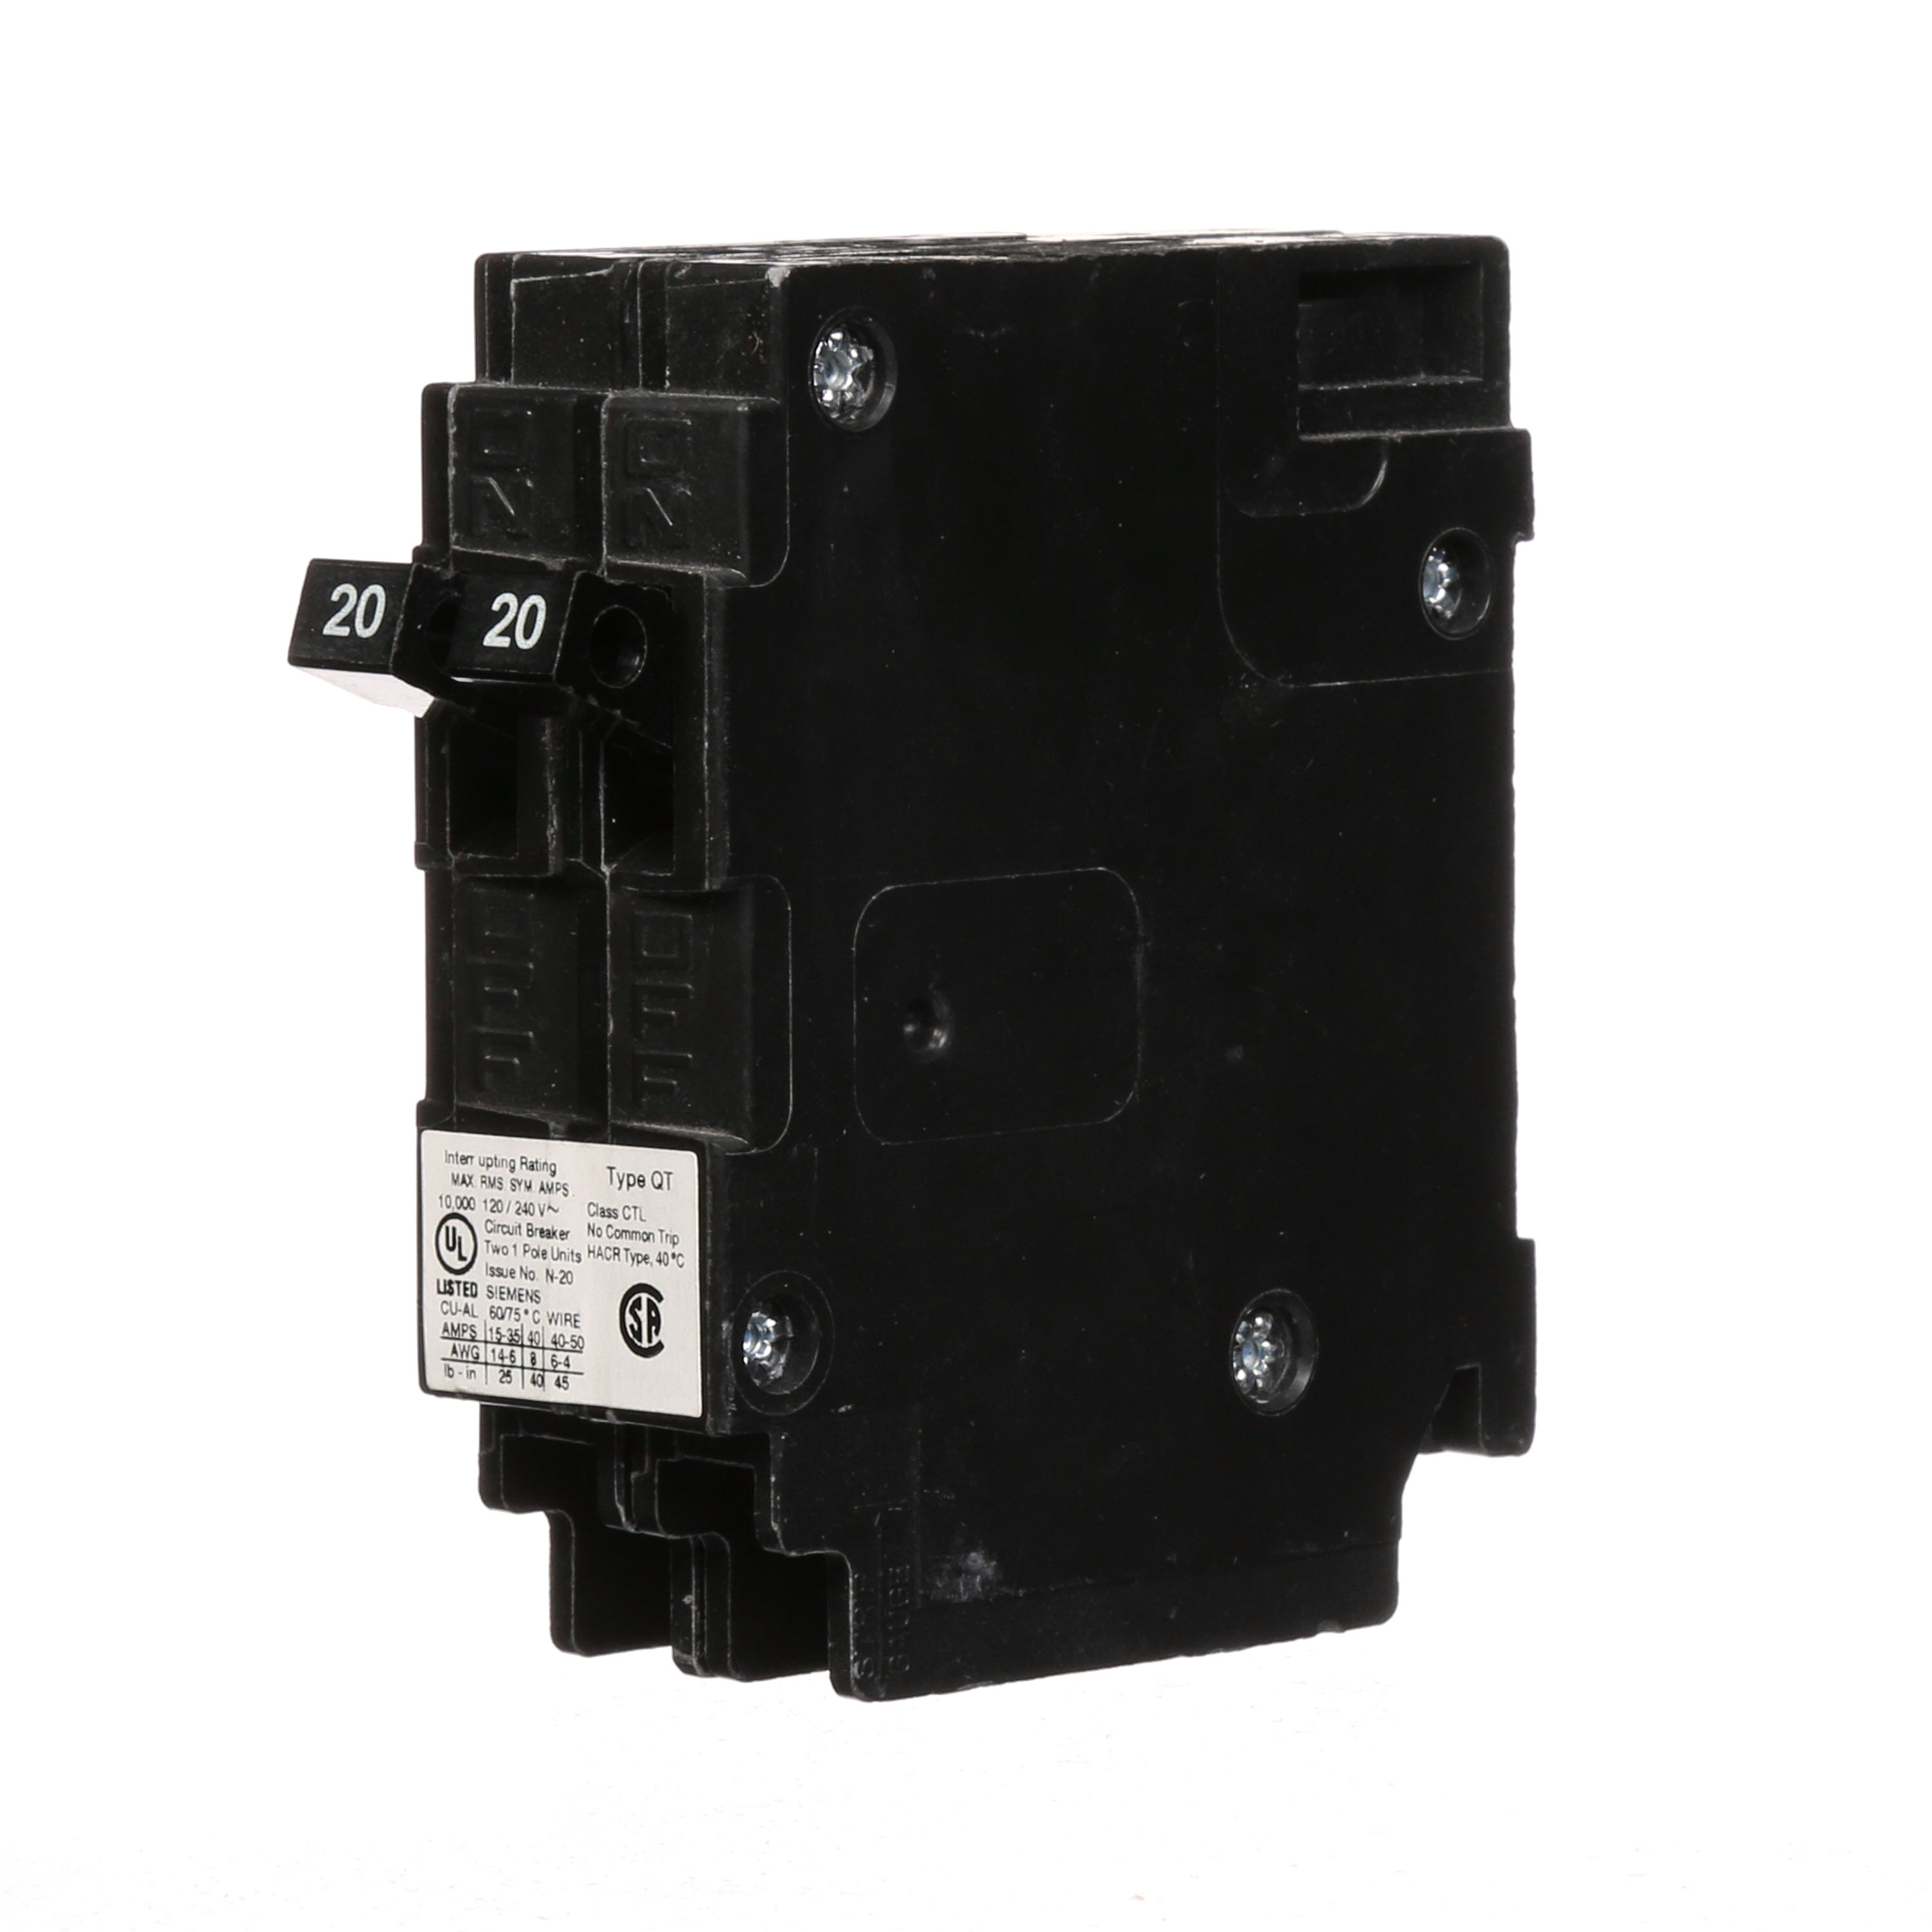 Siemens Low Voltage Residential Circuit Breakers Miniature Thermal Mag Circuit Breakers - Duplex, Triplex, Quadplex are Circuit Protection Load Center Mains, Feeders, and Miniature Circuit Breakers. Dimensions (L x W x H) IN 3 x 2 x 3. Type QT for electrical distribution applications. Meets stds UL 489. Rated 120V (20-20A). Connector plug-in 1-Pole. (AIR 10 AIC). No special features listed.